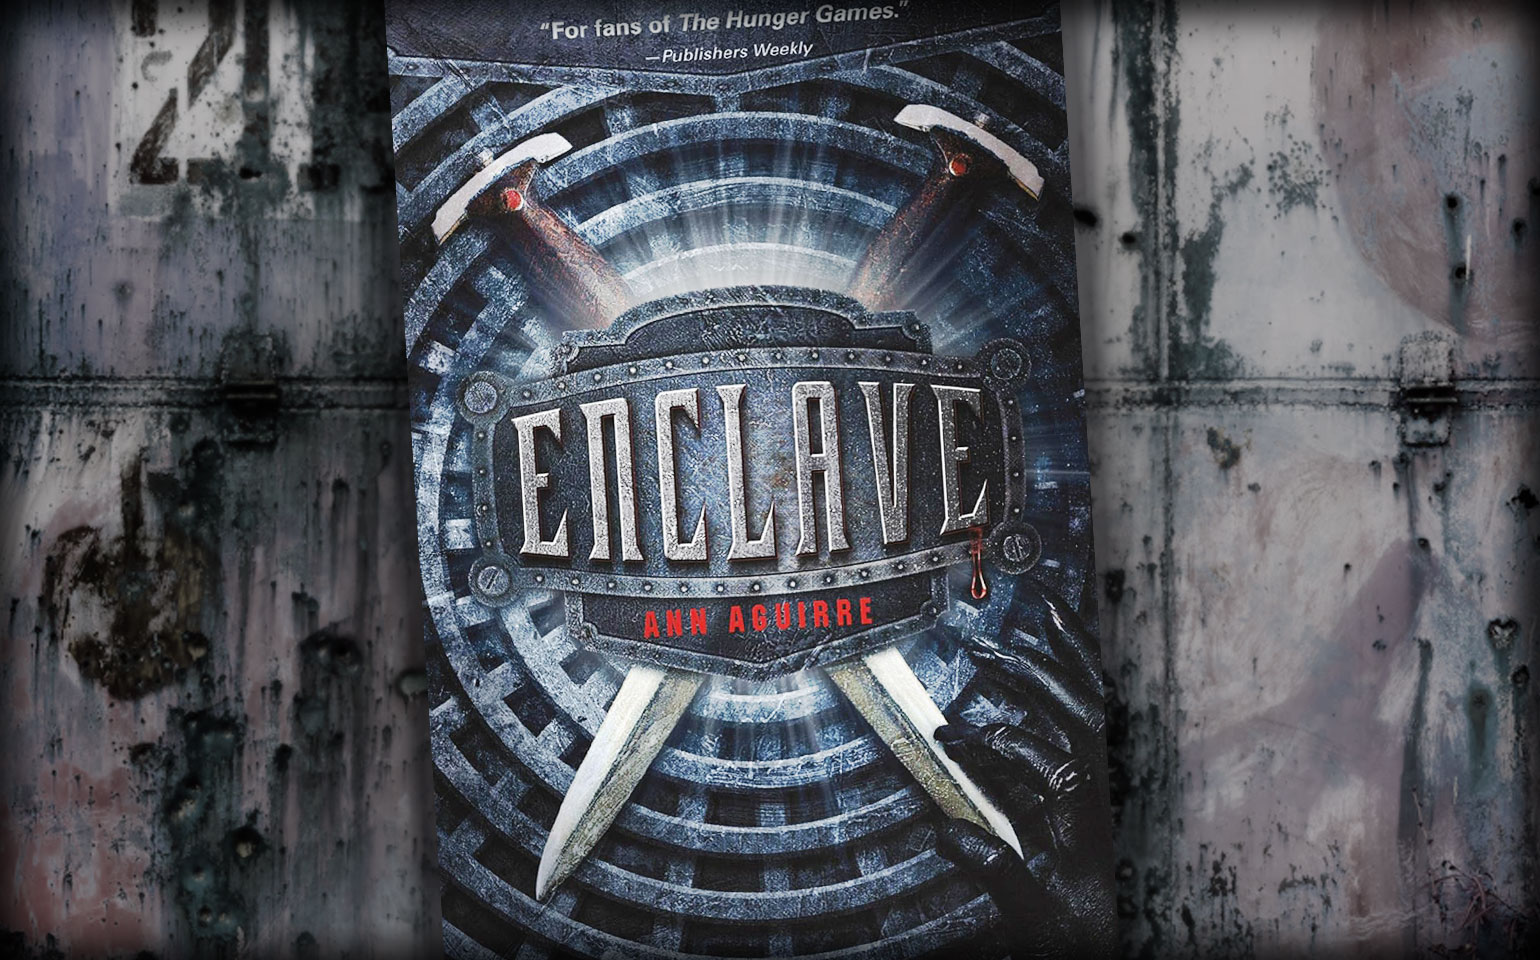 The cover of Enclave is shown.